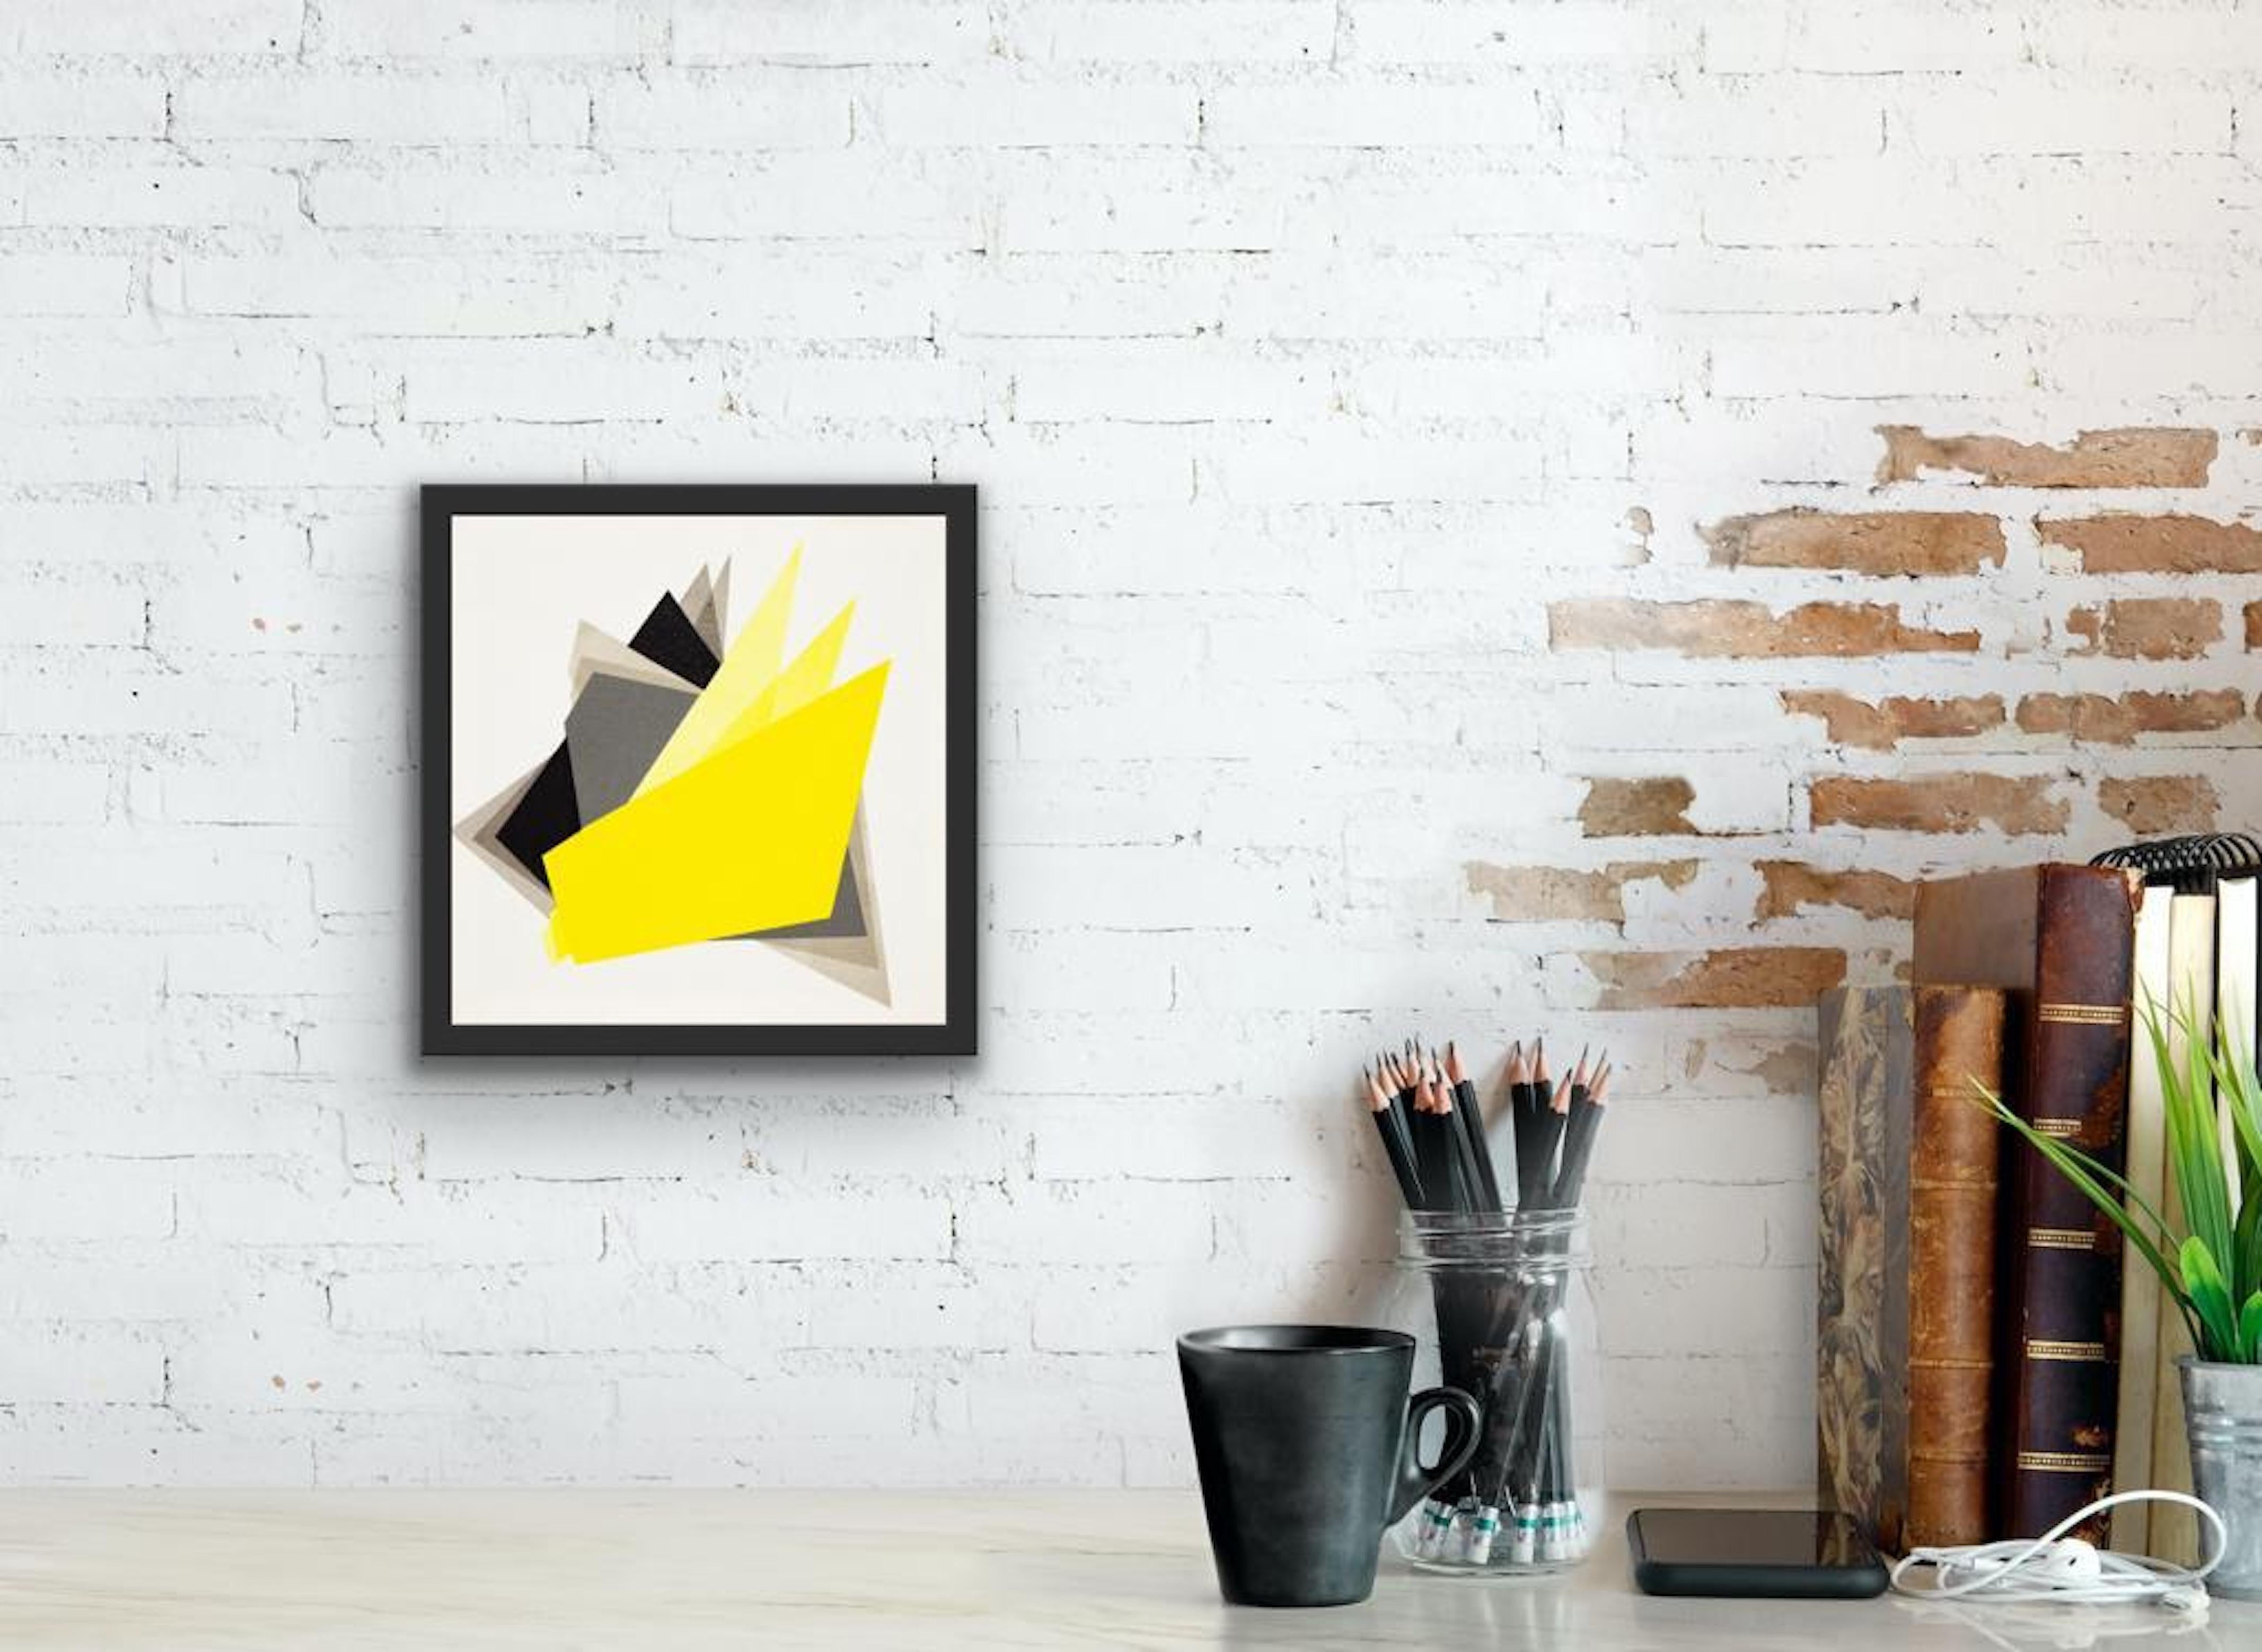 Ready to hang    The simple and pure forms of geometry with an elegant and current reading. I have a strong passion for lines and shapes. I like to vary my work between the purity of forms and the creation of forms through straight lines. I believe